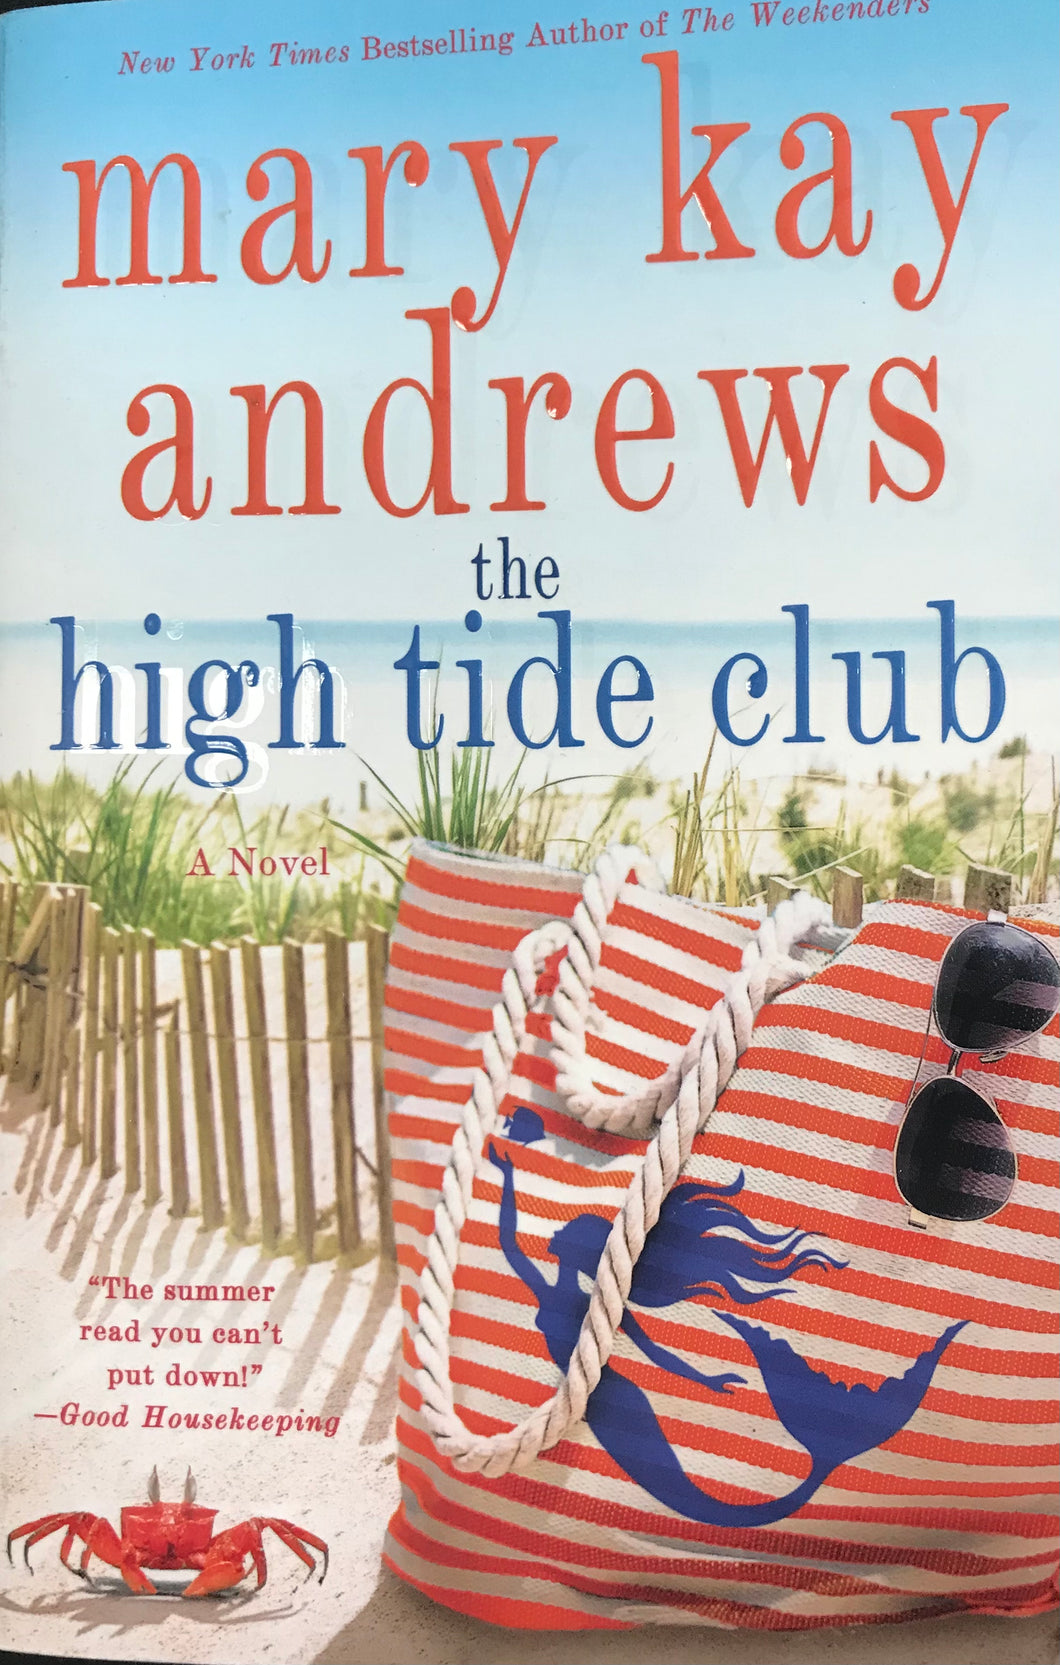 The High Tide Club- Mary Kay Andrews